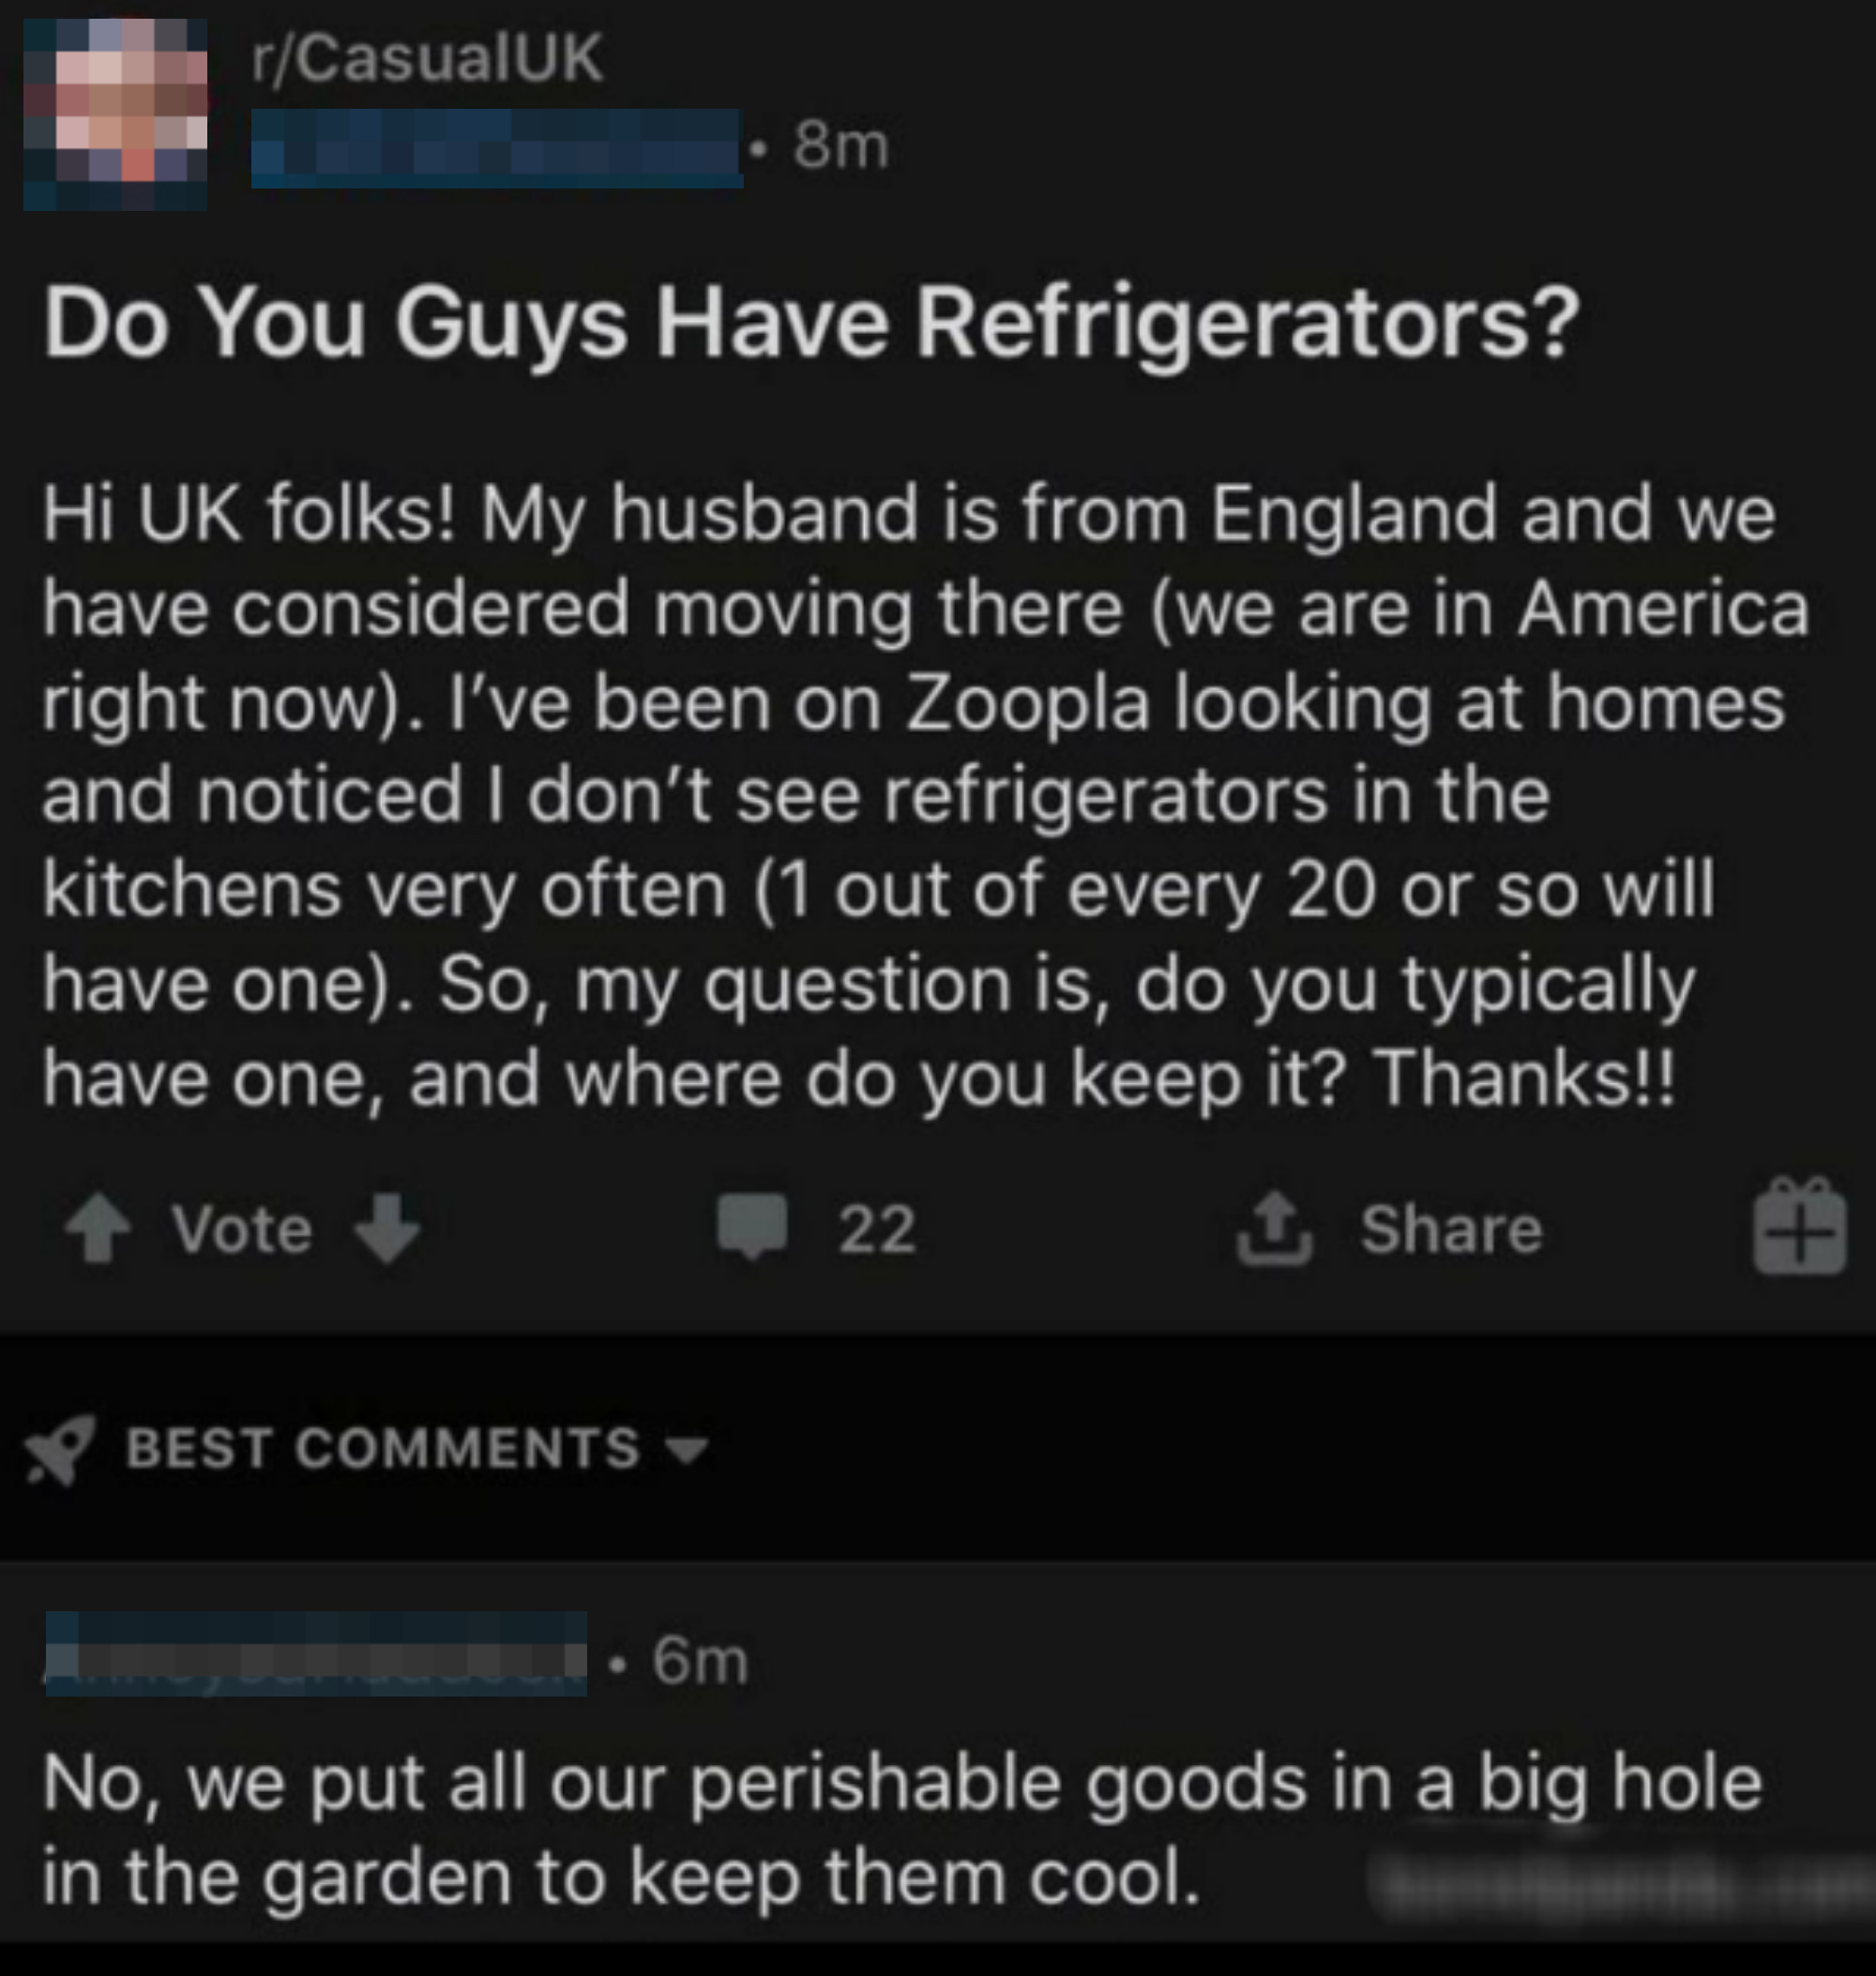 Reddit post asking about refrigerator placement in UK kitchens, with various user comments engaging in the discussion